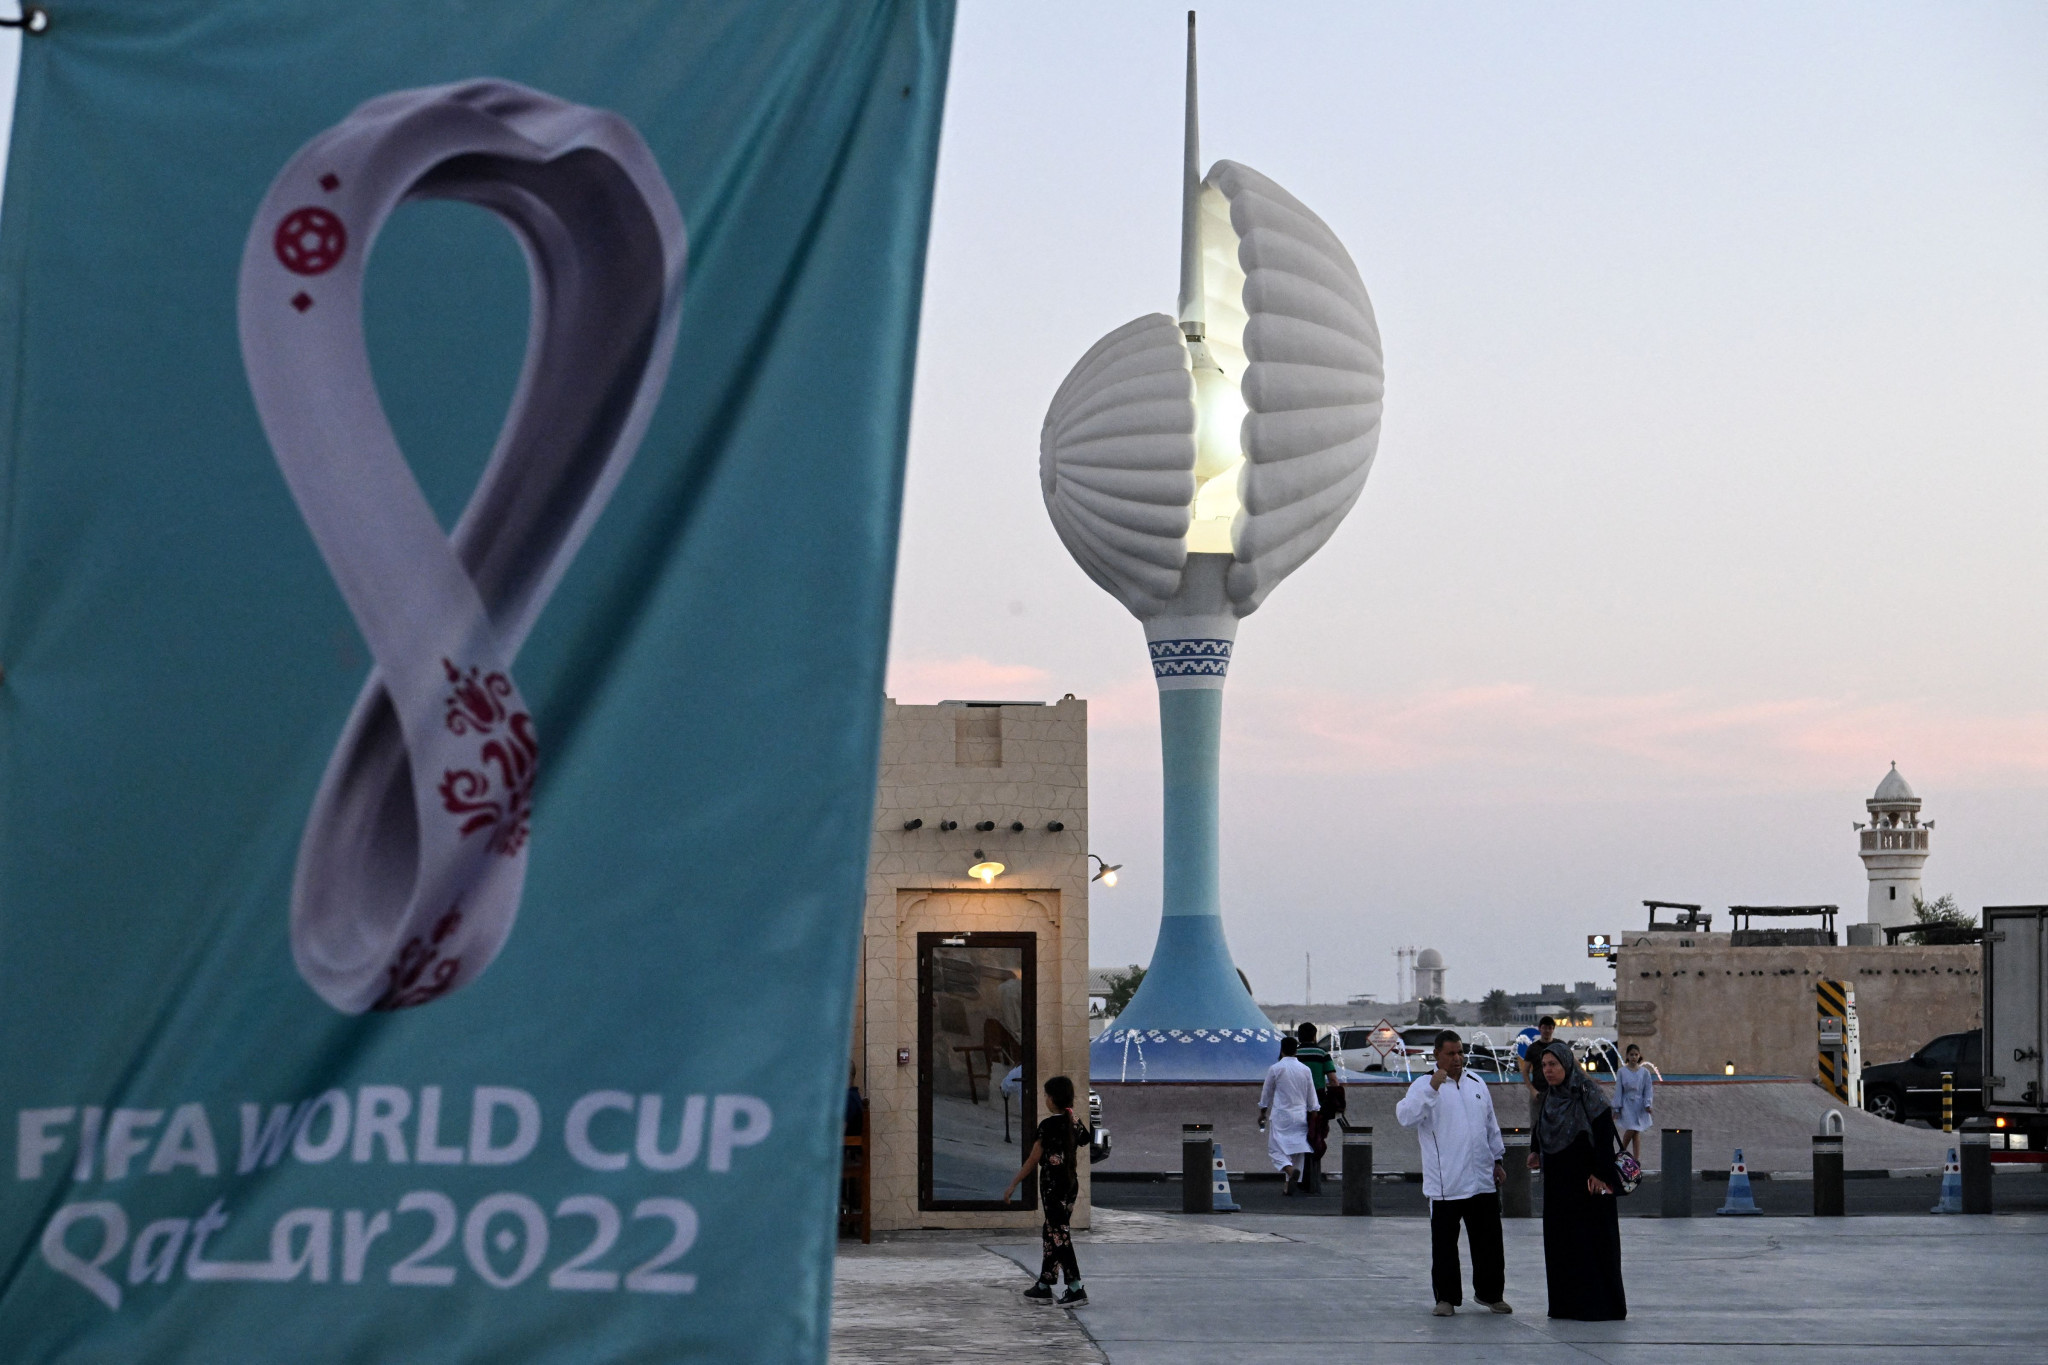 Final preparations are taking place in Qatar for what is set to be the most politicised and controversial FIFA World Cup in history ©Getty Images